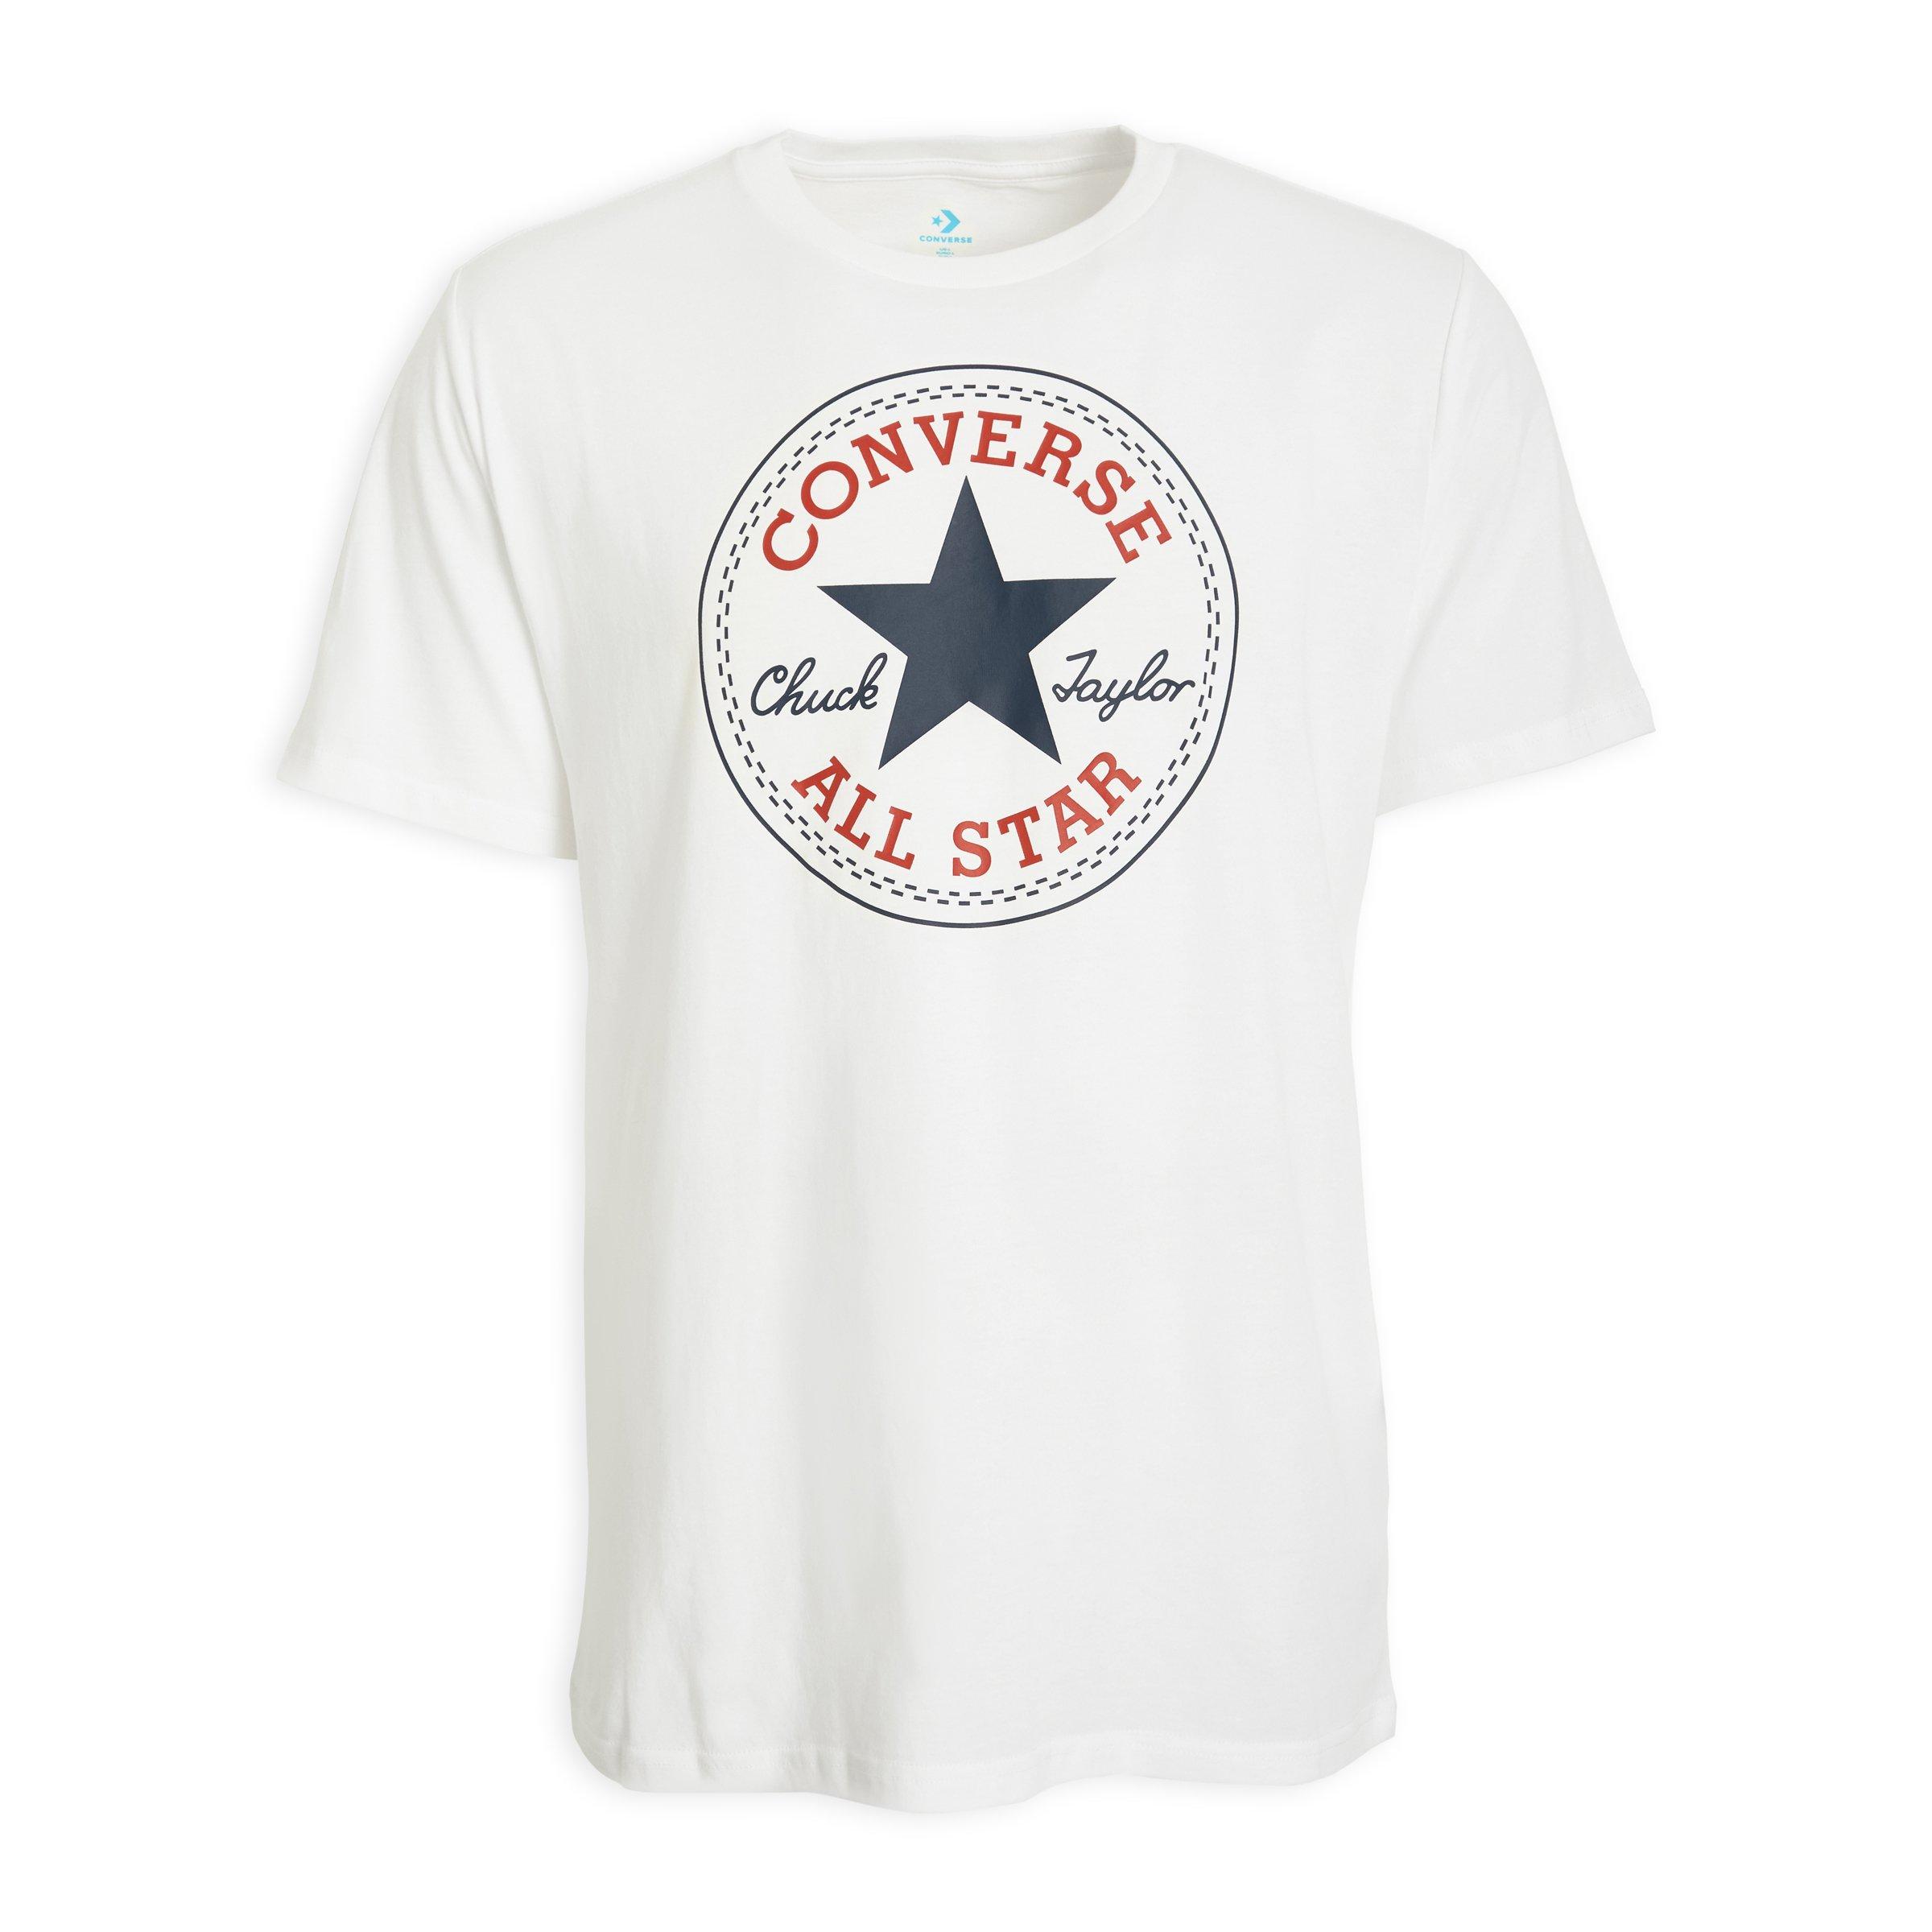 Buy Converse Chuck Taylor Patch Graphic T-Shirt Clothing Online ...